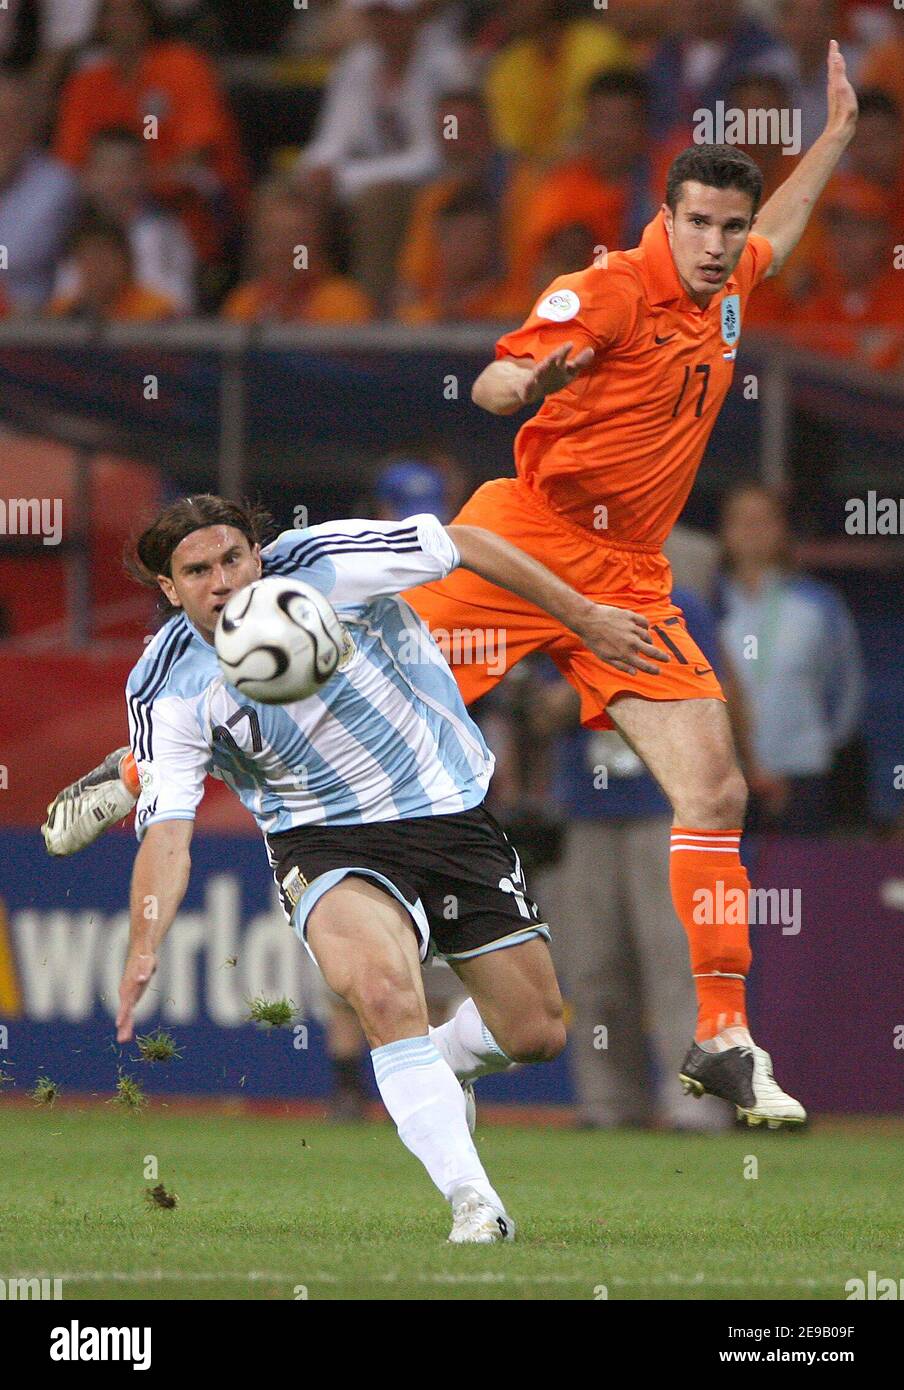 Argentina's Robin Van Persie during the World Cup 2006, Group C, Netherlands vs Argentina at the Commerzbank-Arena Stadium in Frankfurt, Germany on June 21, 2006. The match ended in 0-0 draw. Photo by Gouhier-Hahn-Orban/Cameleon/ABACAPRESS.COM Stock Photo